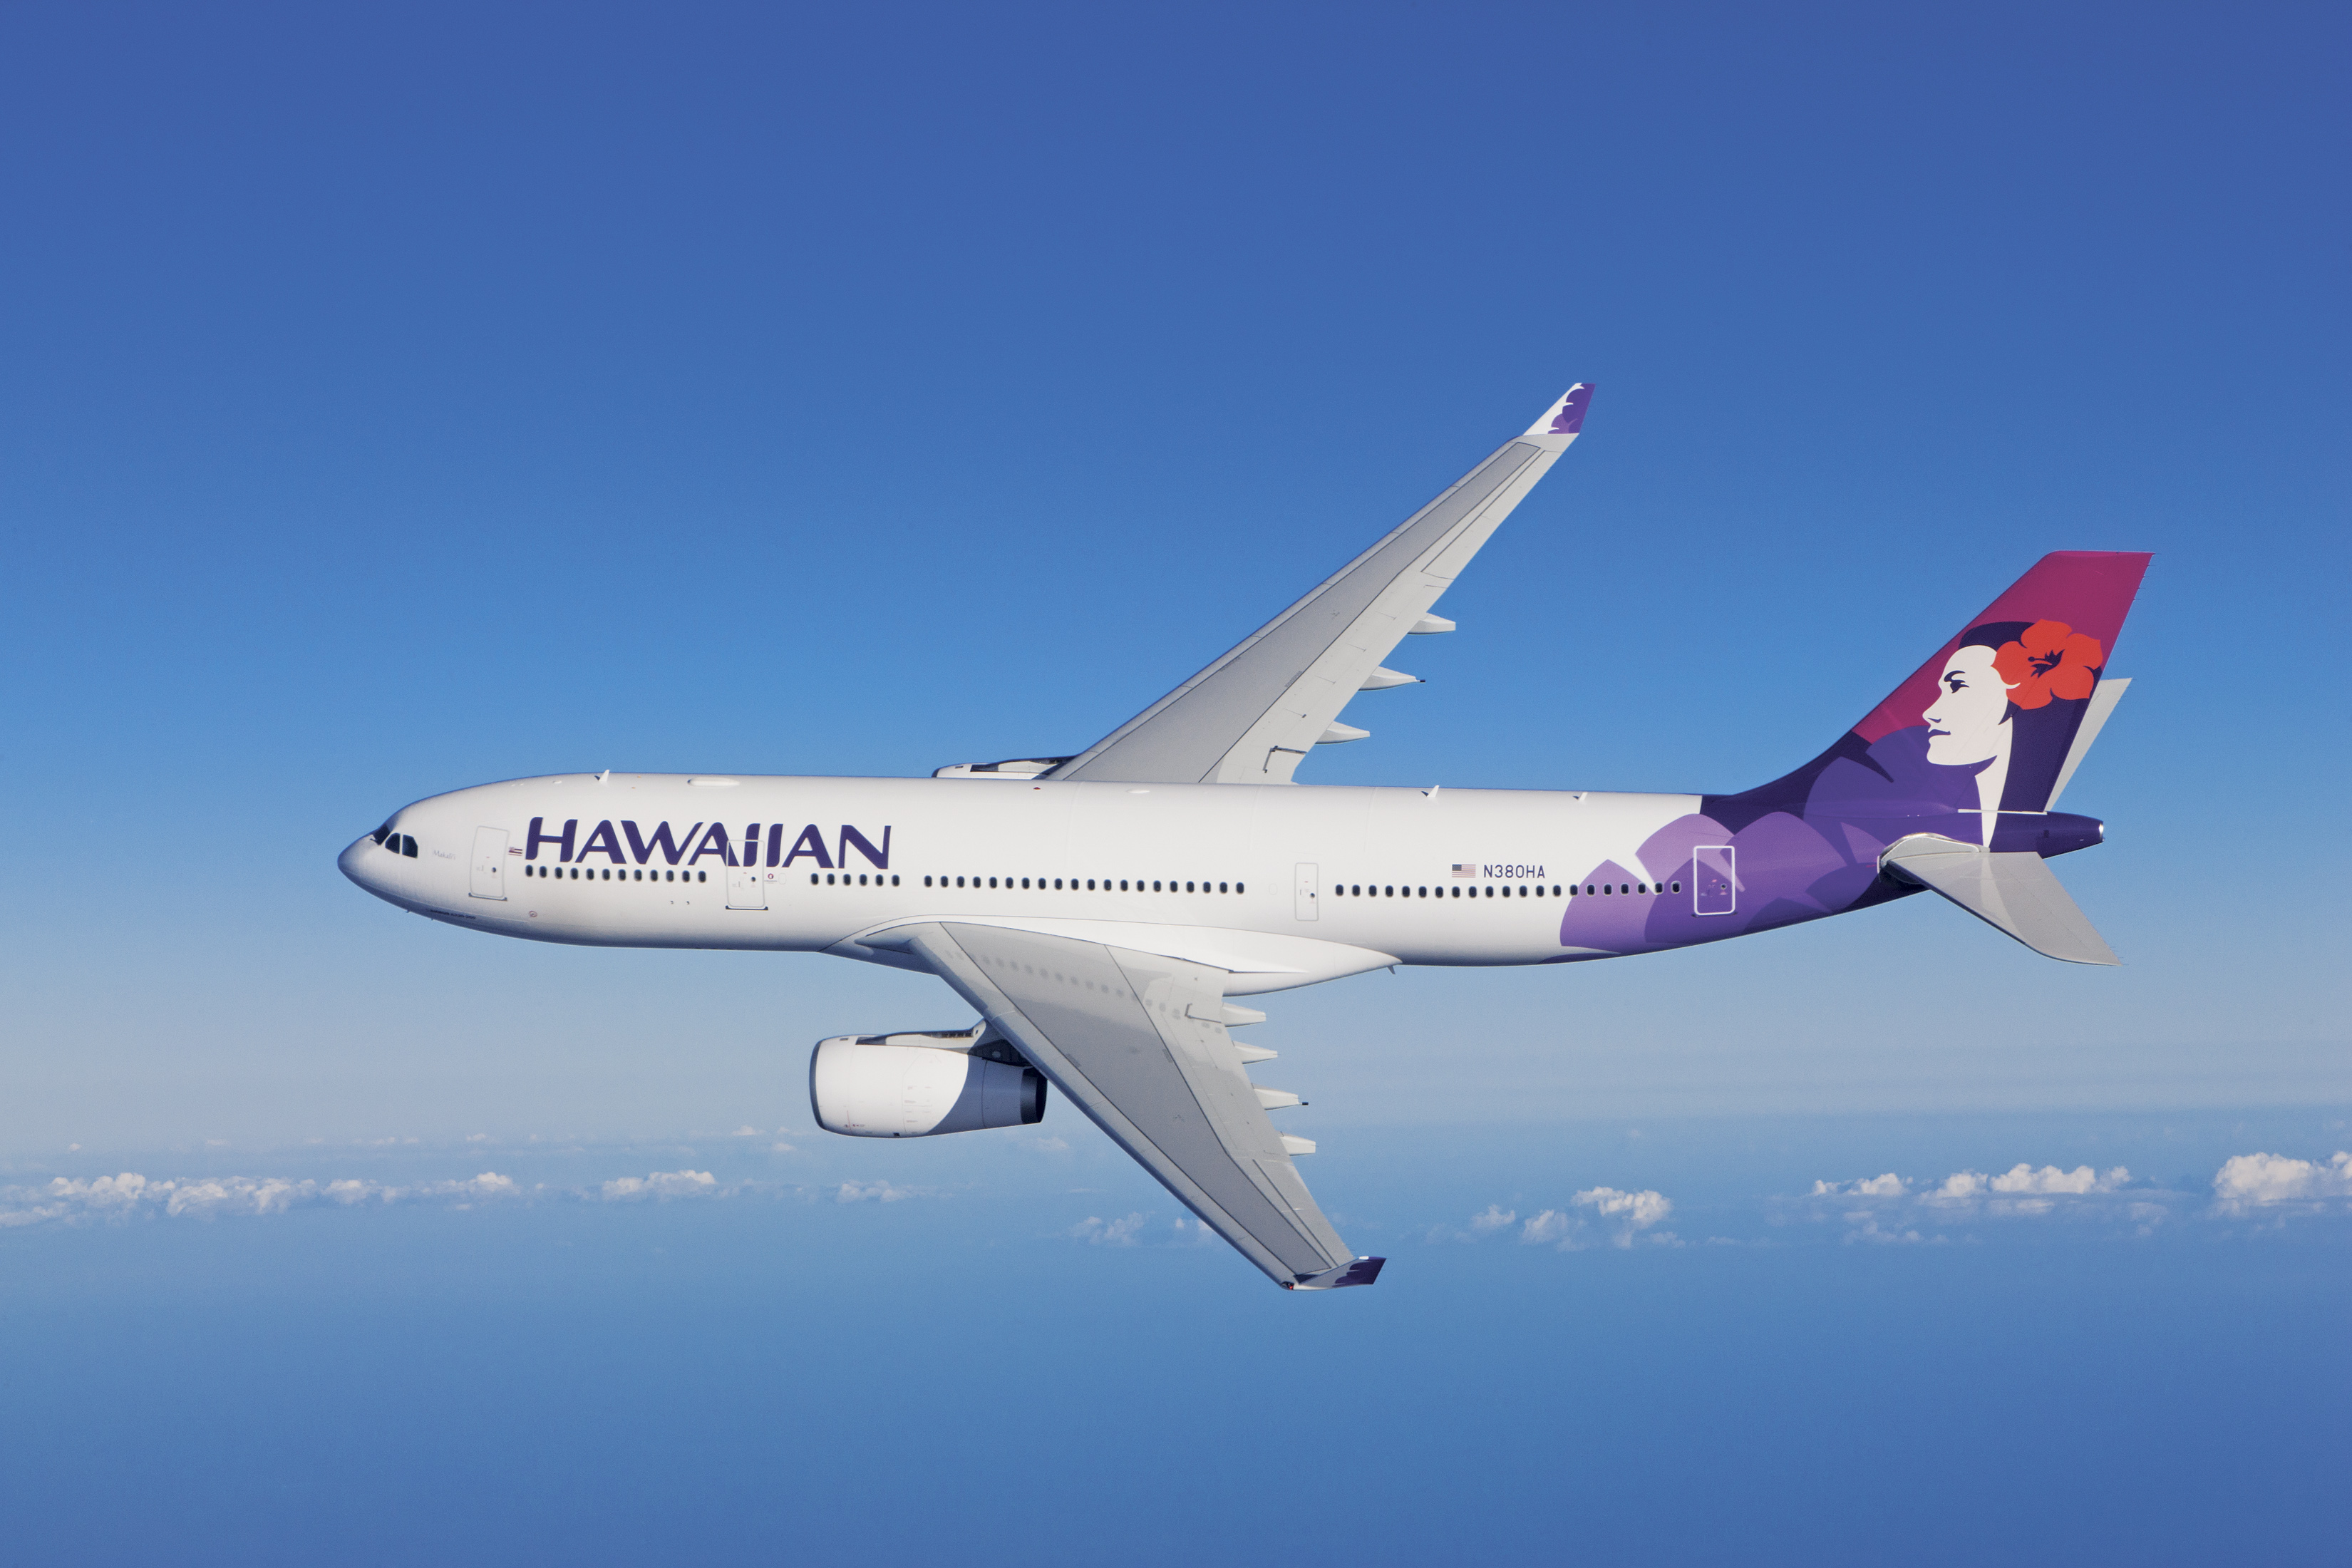 Hawaiian Airlines Airbus A330 (N380HA) - AirlineReporter : AirlineReporter